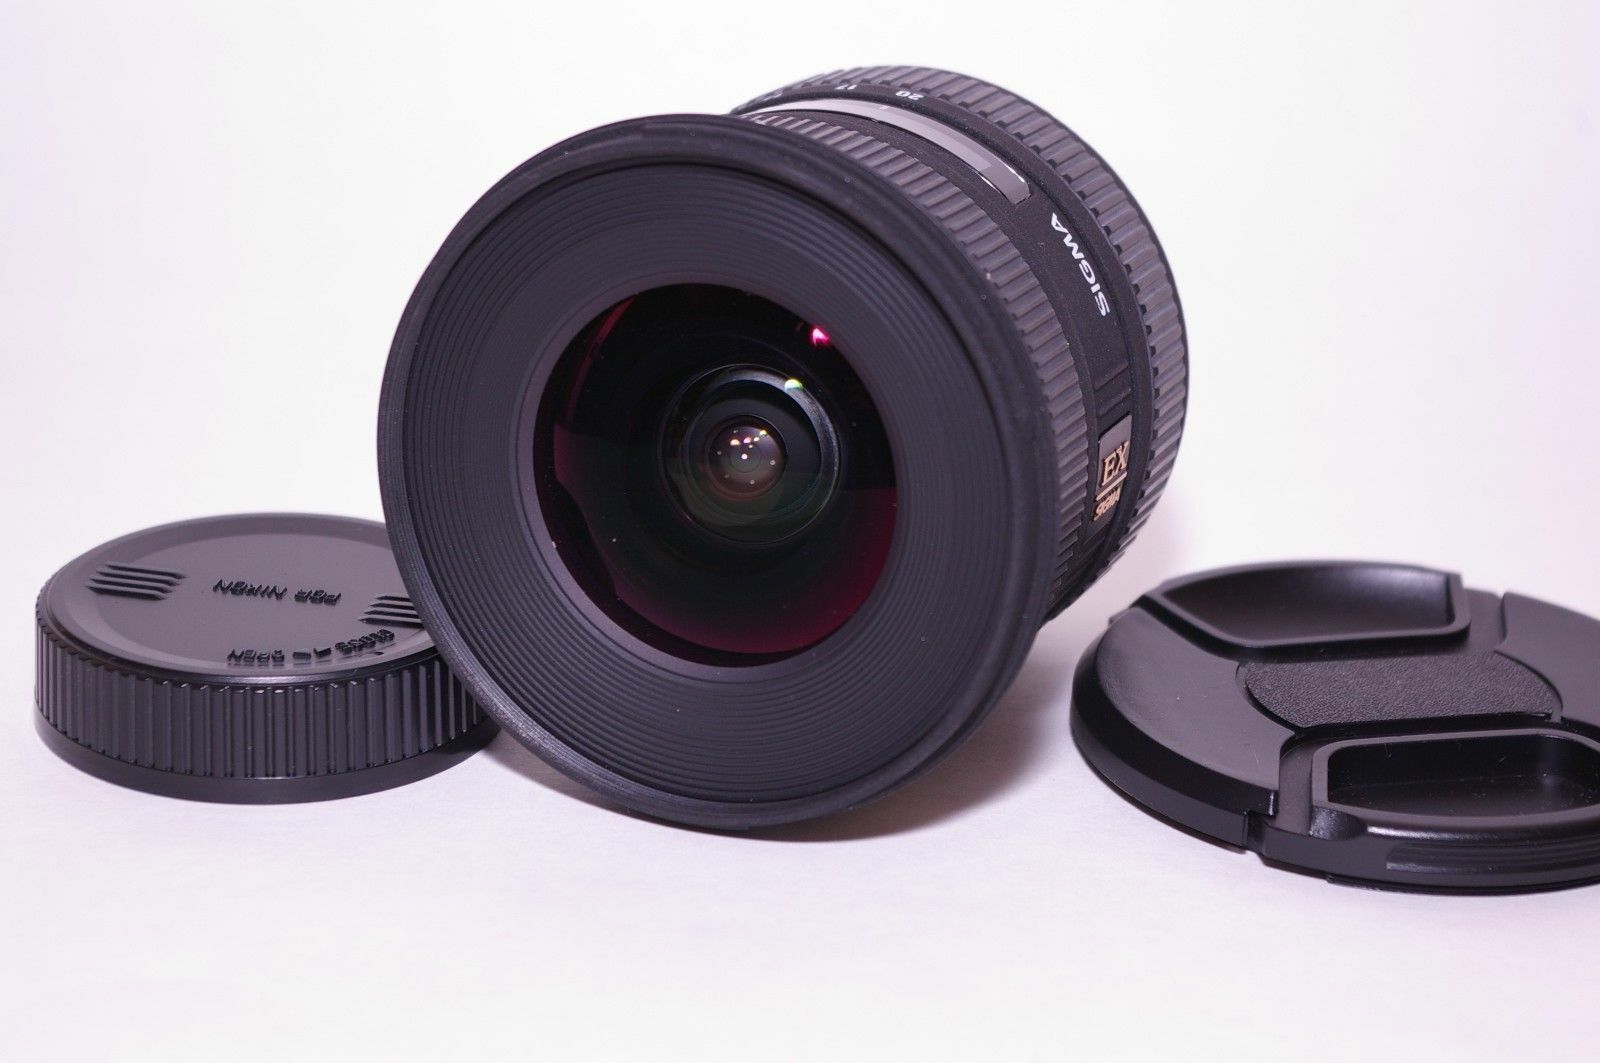 Sigma 10-20mm f/4-5.6D EX DC Lens for Sony A